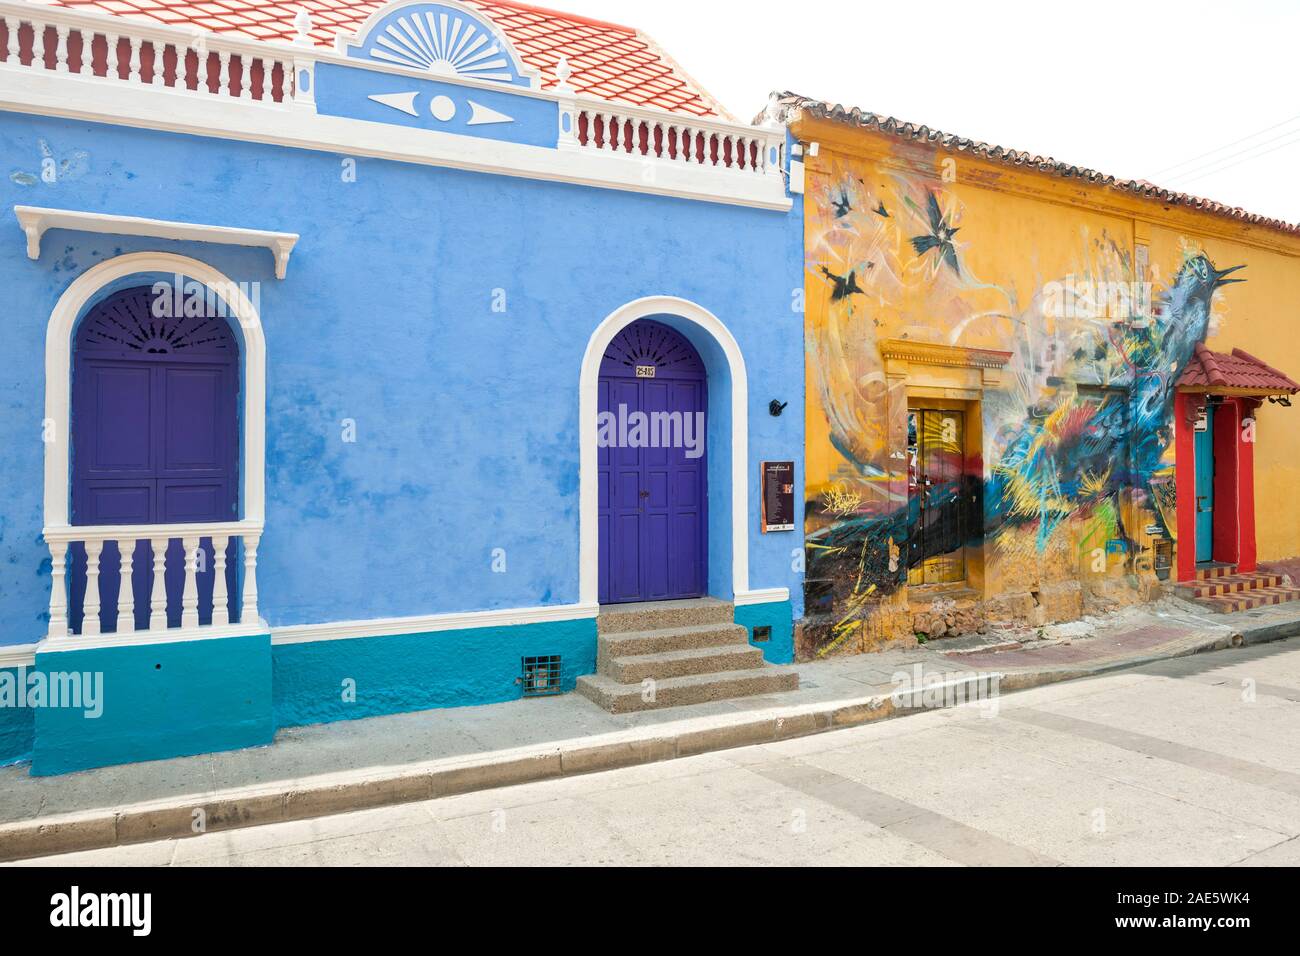 Graffiti mural of a bird on a house on Holy Trinity square (Plaza Trinidad) in the Getsemani neighborhood of Cartagena, Colombia. Stock Photo